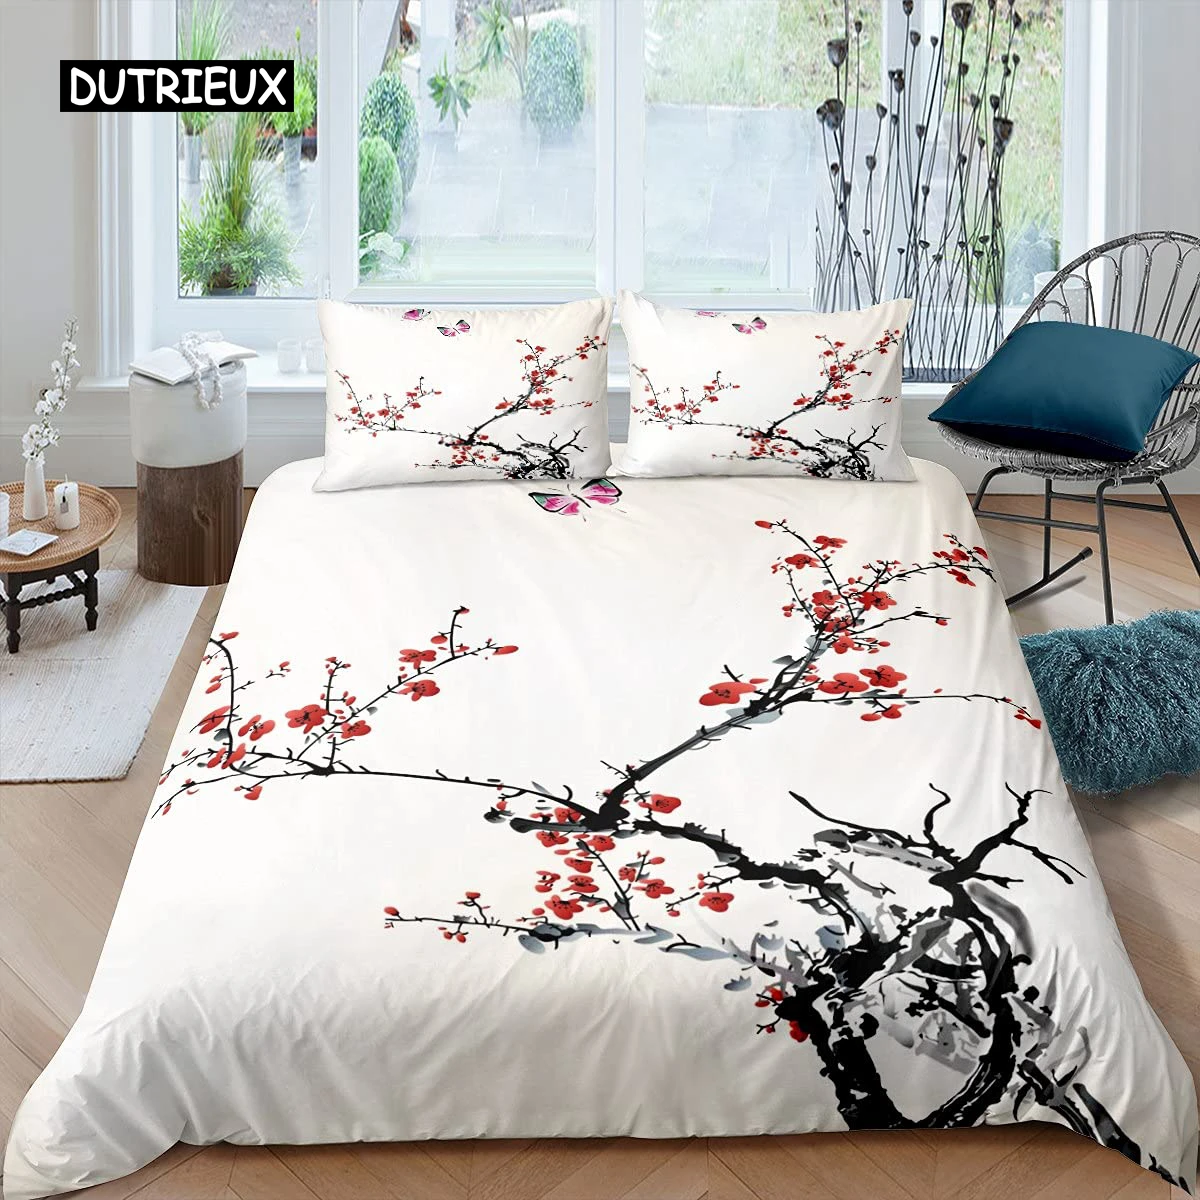 

Plum Blossom Duvet Cover Set Red Flower Floral Comforter Cover for Girls Teens Microfiber Butterfly Branches Printed Bedding Set